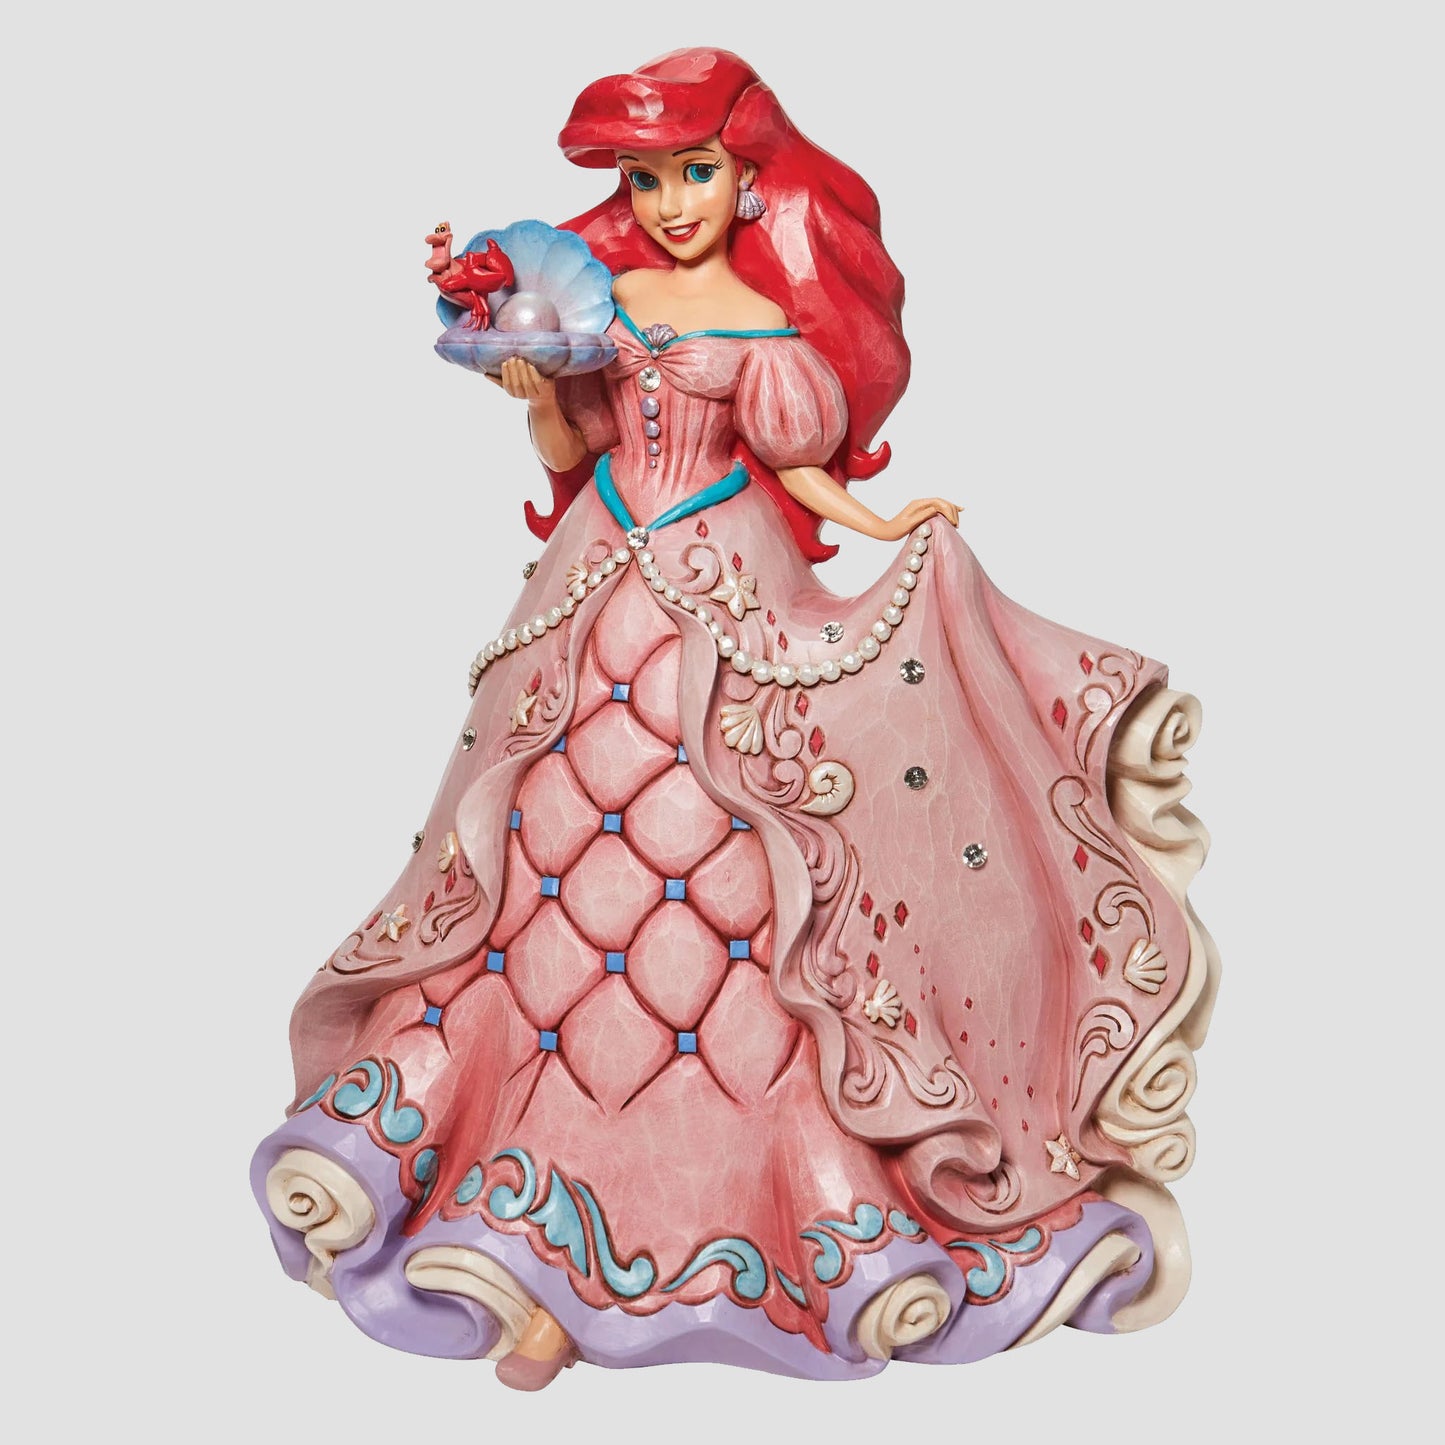 Ariel In Shell You're A Precious Jewel To Cherish Forever